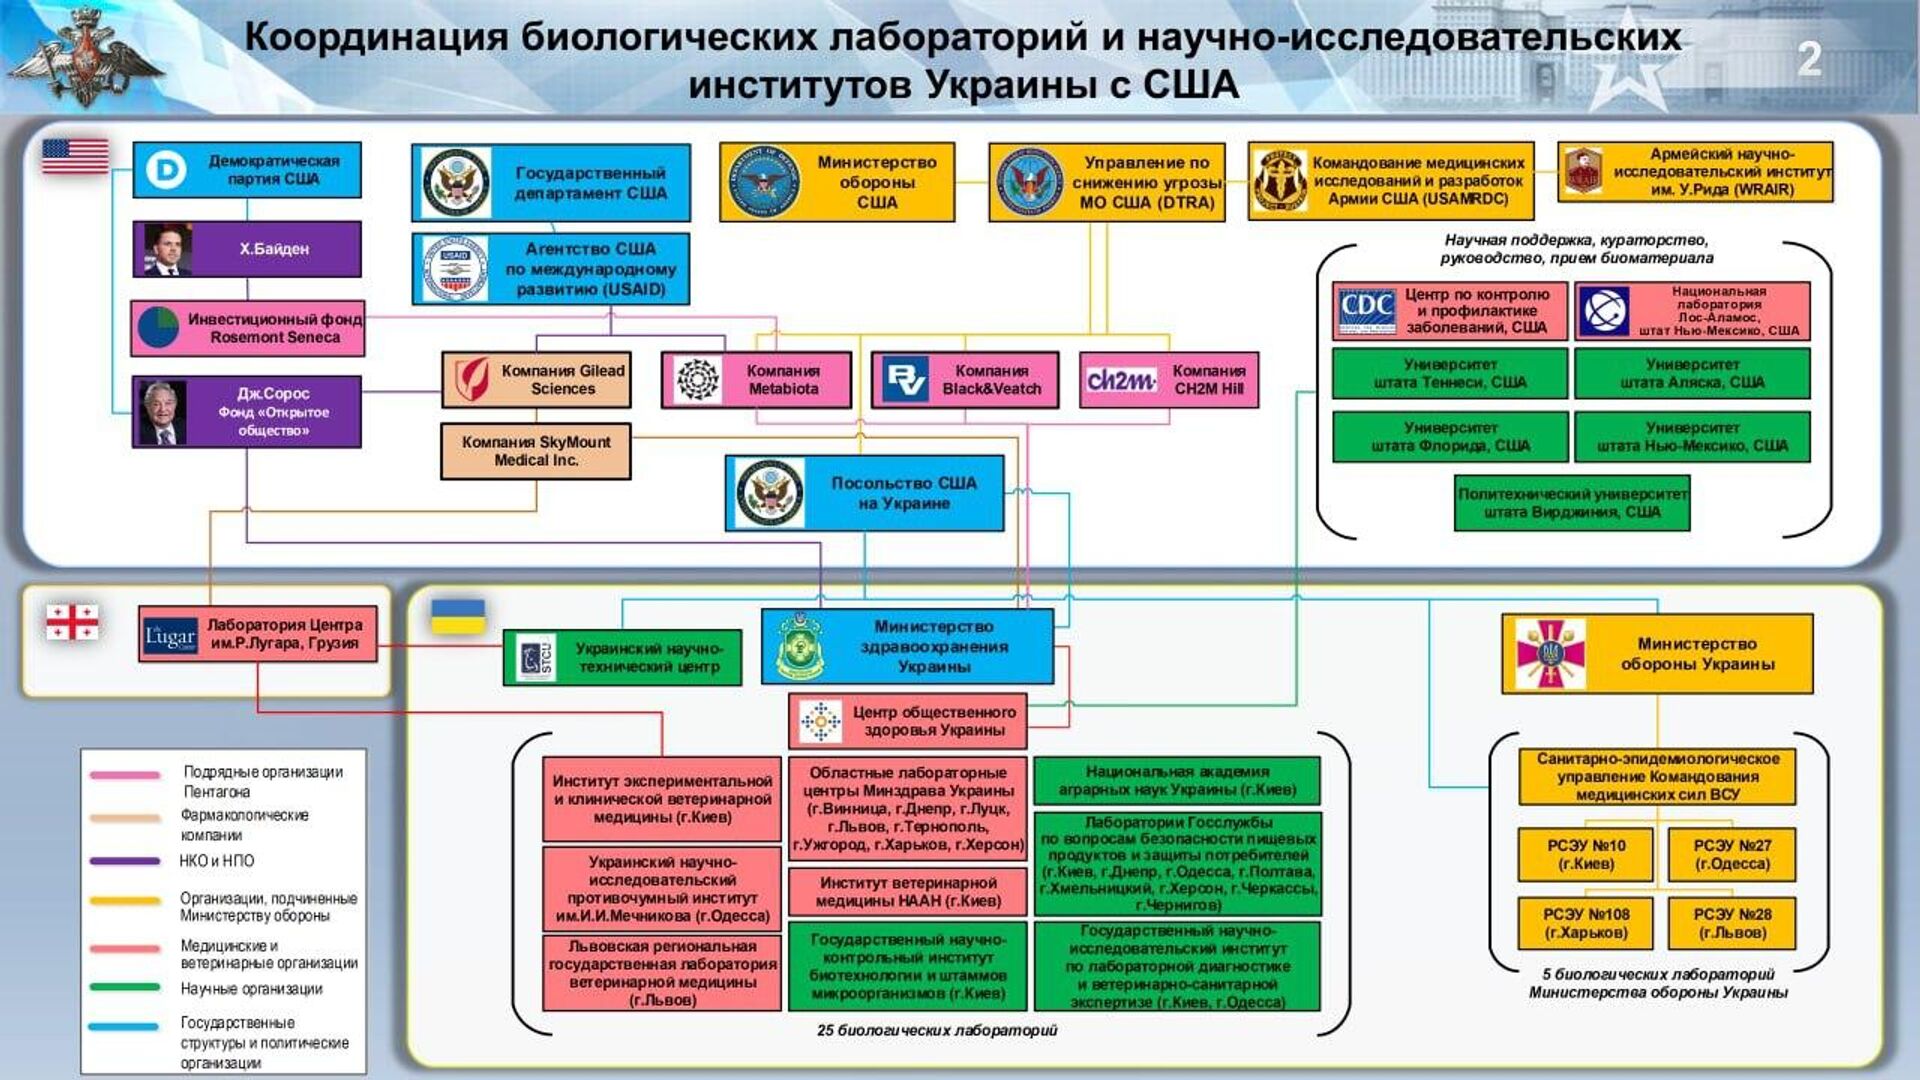 Russian Defence Ministry presentation detailing coordination between Ukraine-based labs and US agencies and companies, including Hunter Biden and George Soros (far left), the US State Department, USAID, Gilead Sciences, SkyMount Medical, Metabiota, Black&Veatch, CH2M Hill, the US Embassy in Ukraine (center) and the CDC, the National Laboratory at Los Alamos and the universities of Tennessee, Alaska, Florida, New Mexico and Virginia (right). Below, ties are shown to the Lugar Center in Georgia, the Ukrainian Ministry of Health and associated centers and institutes, and teh Ukrainian Defence Ministry's epidemiological departments. - Sputnik International, 1920, 26.03.2022